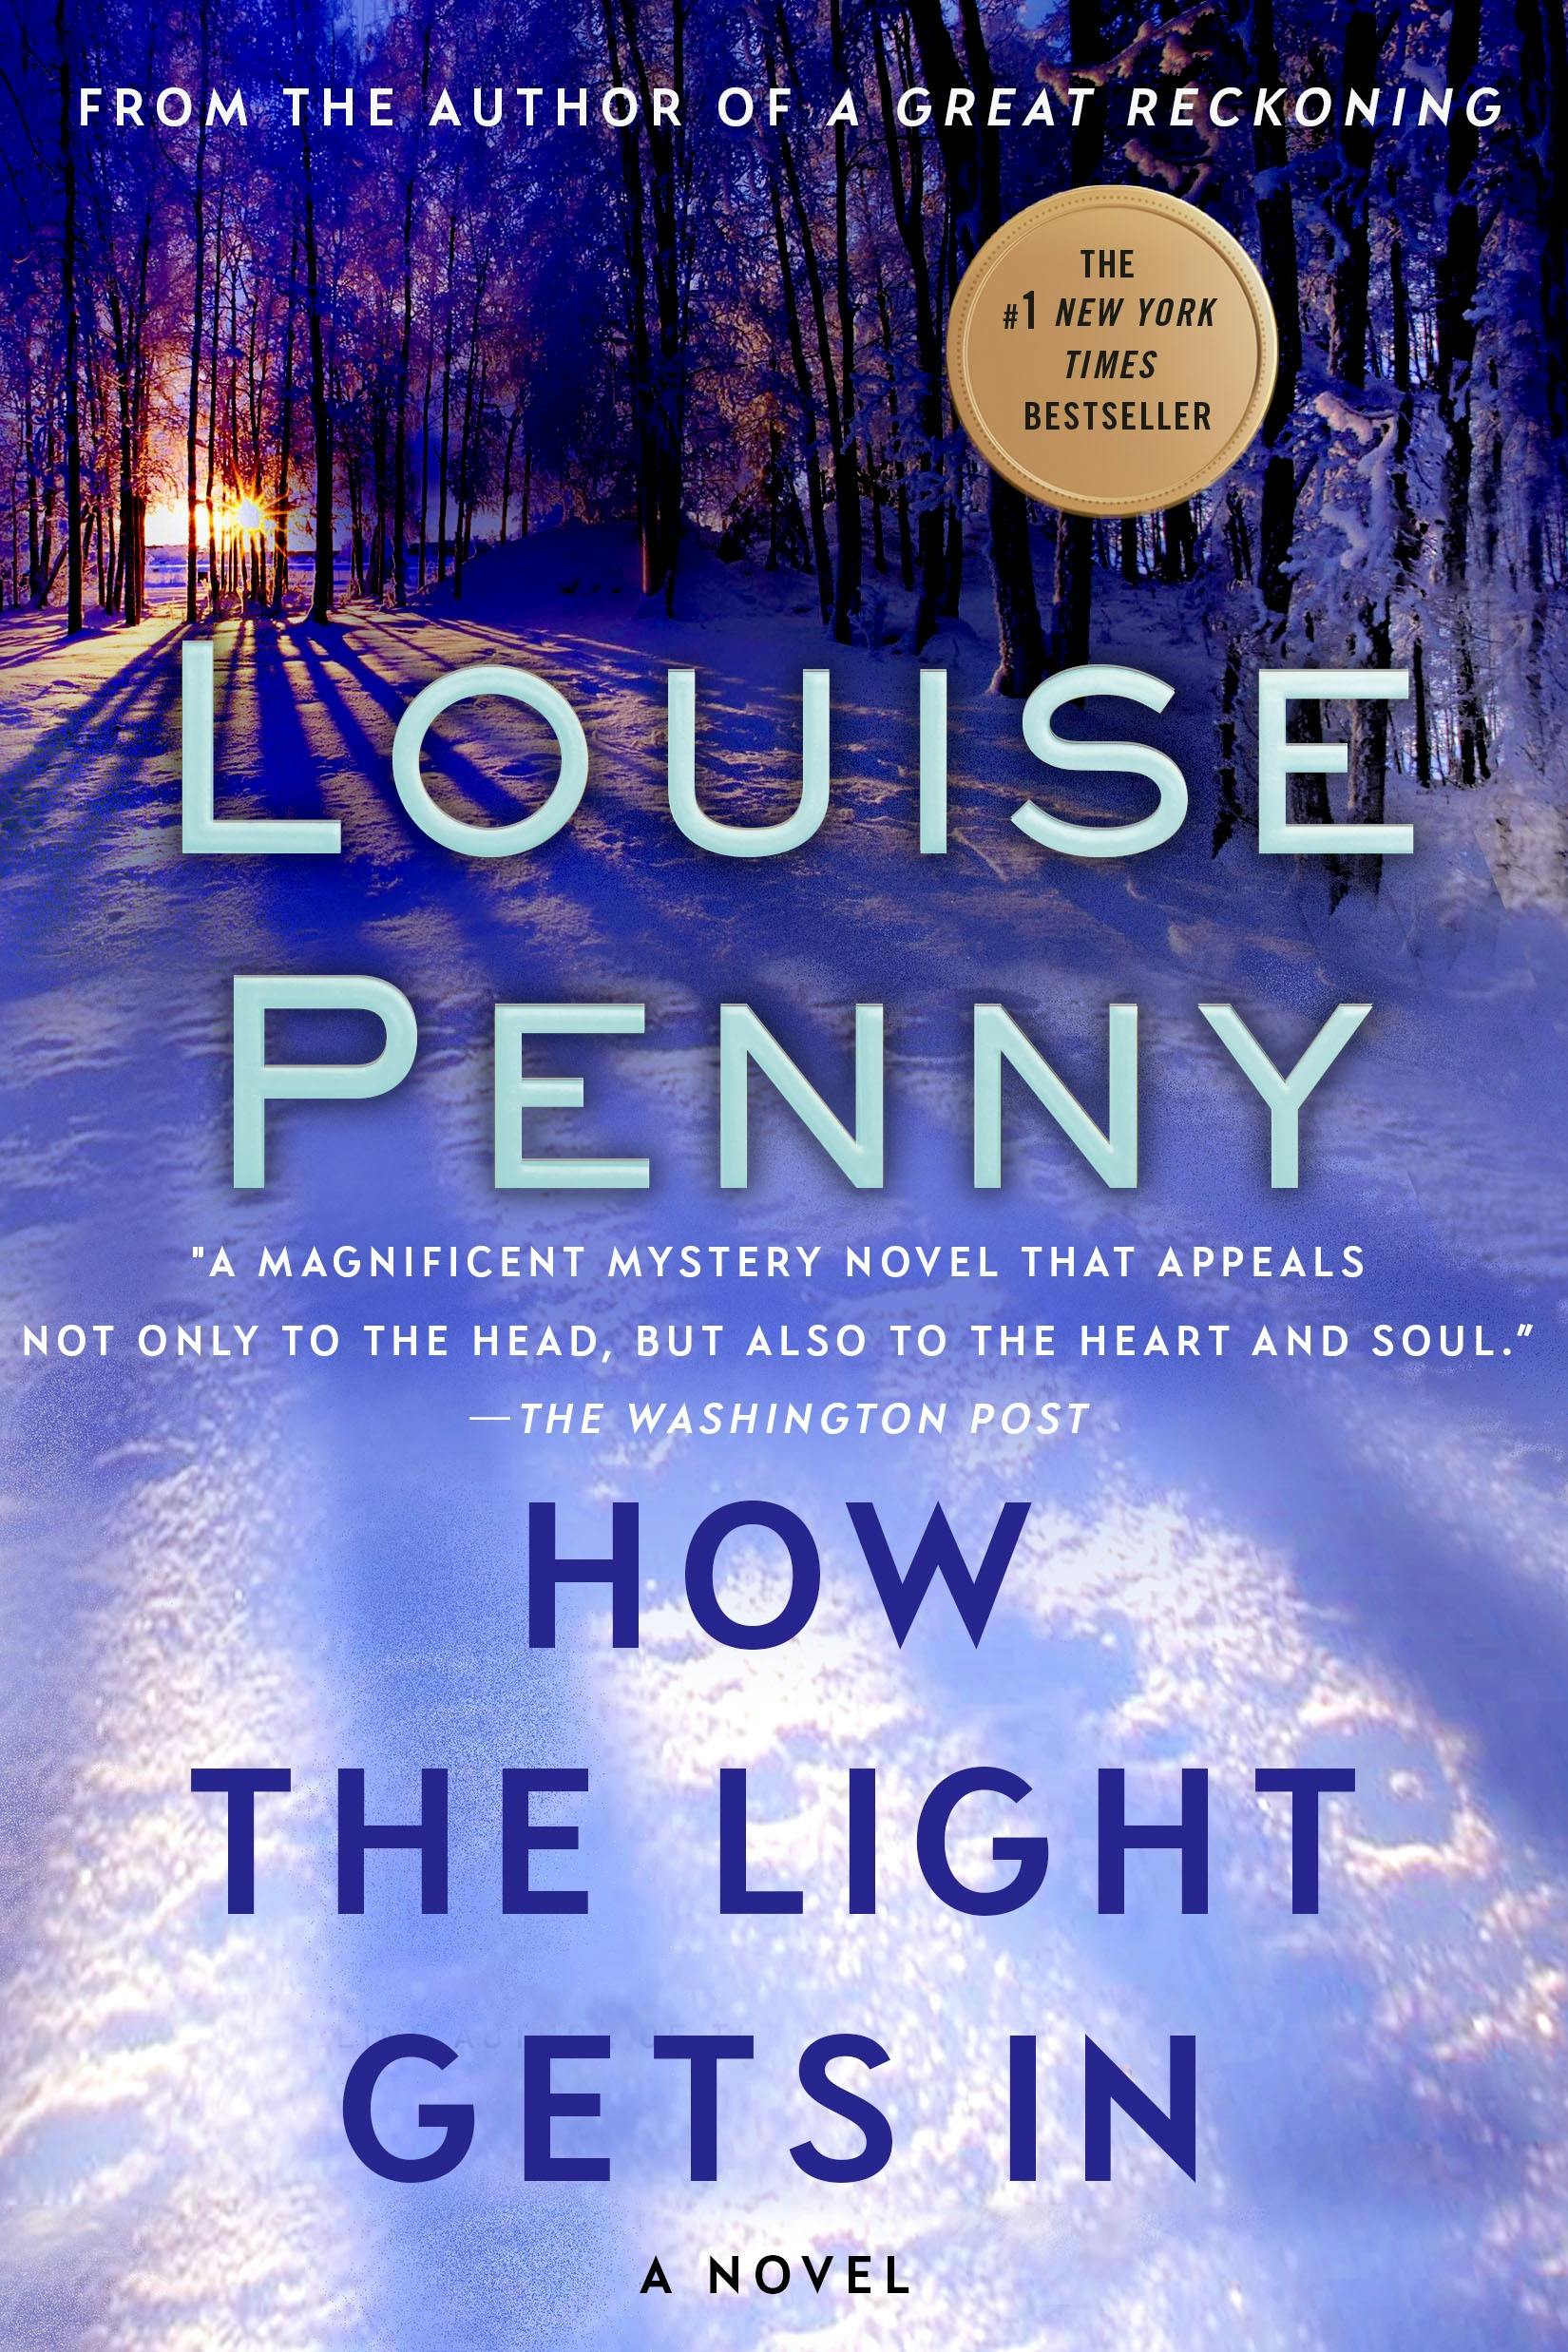 Glass Houses' is yet another excellent Louise Penny mystery